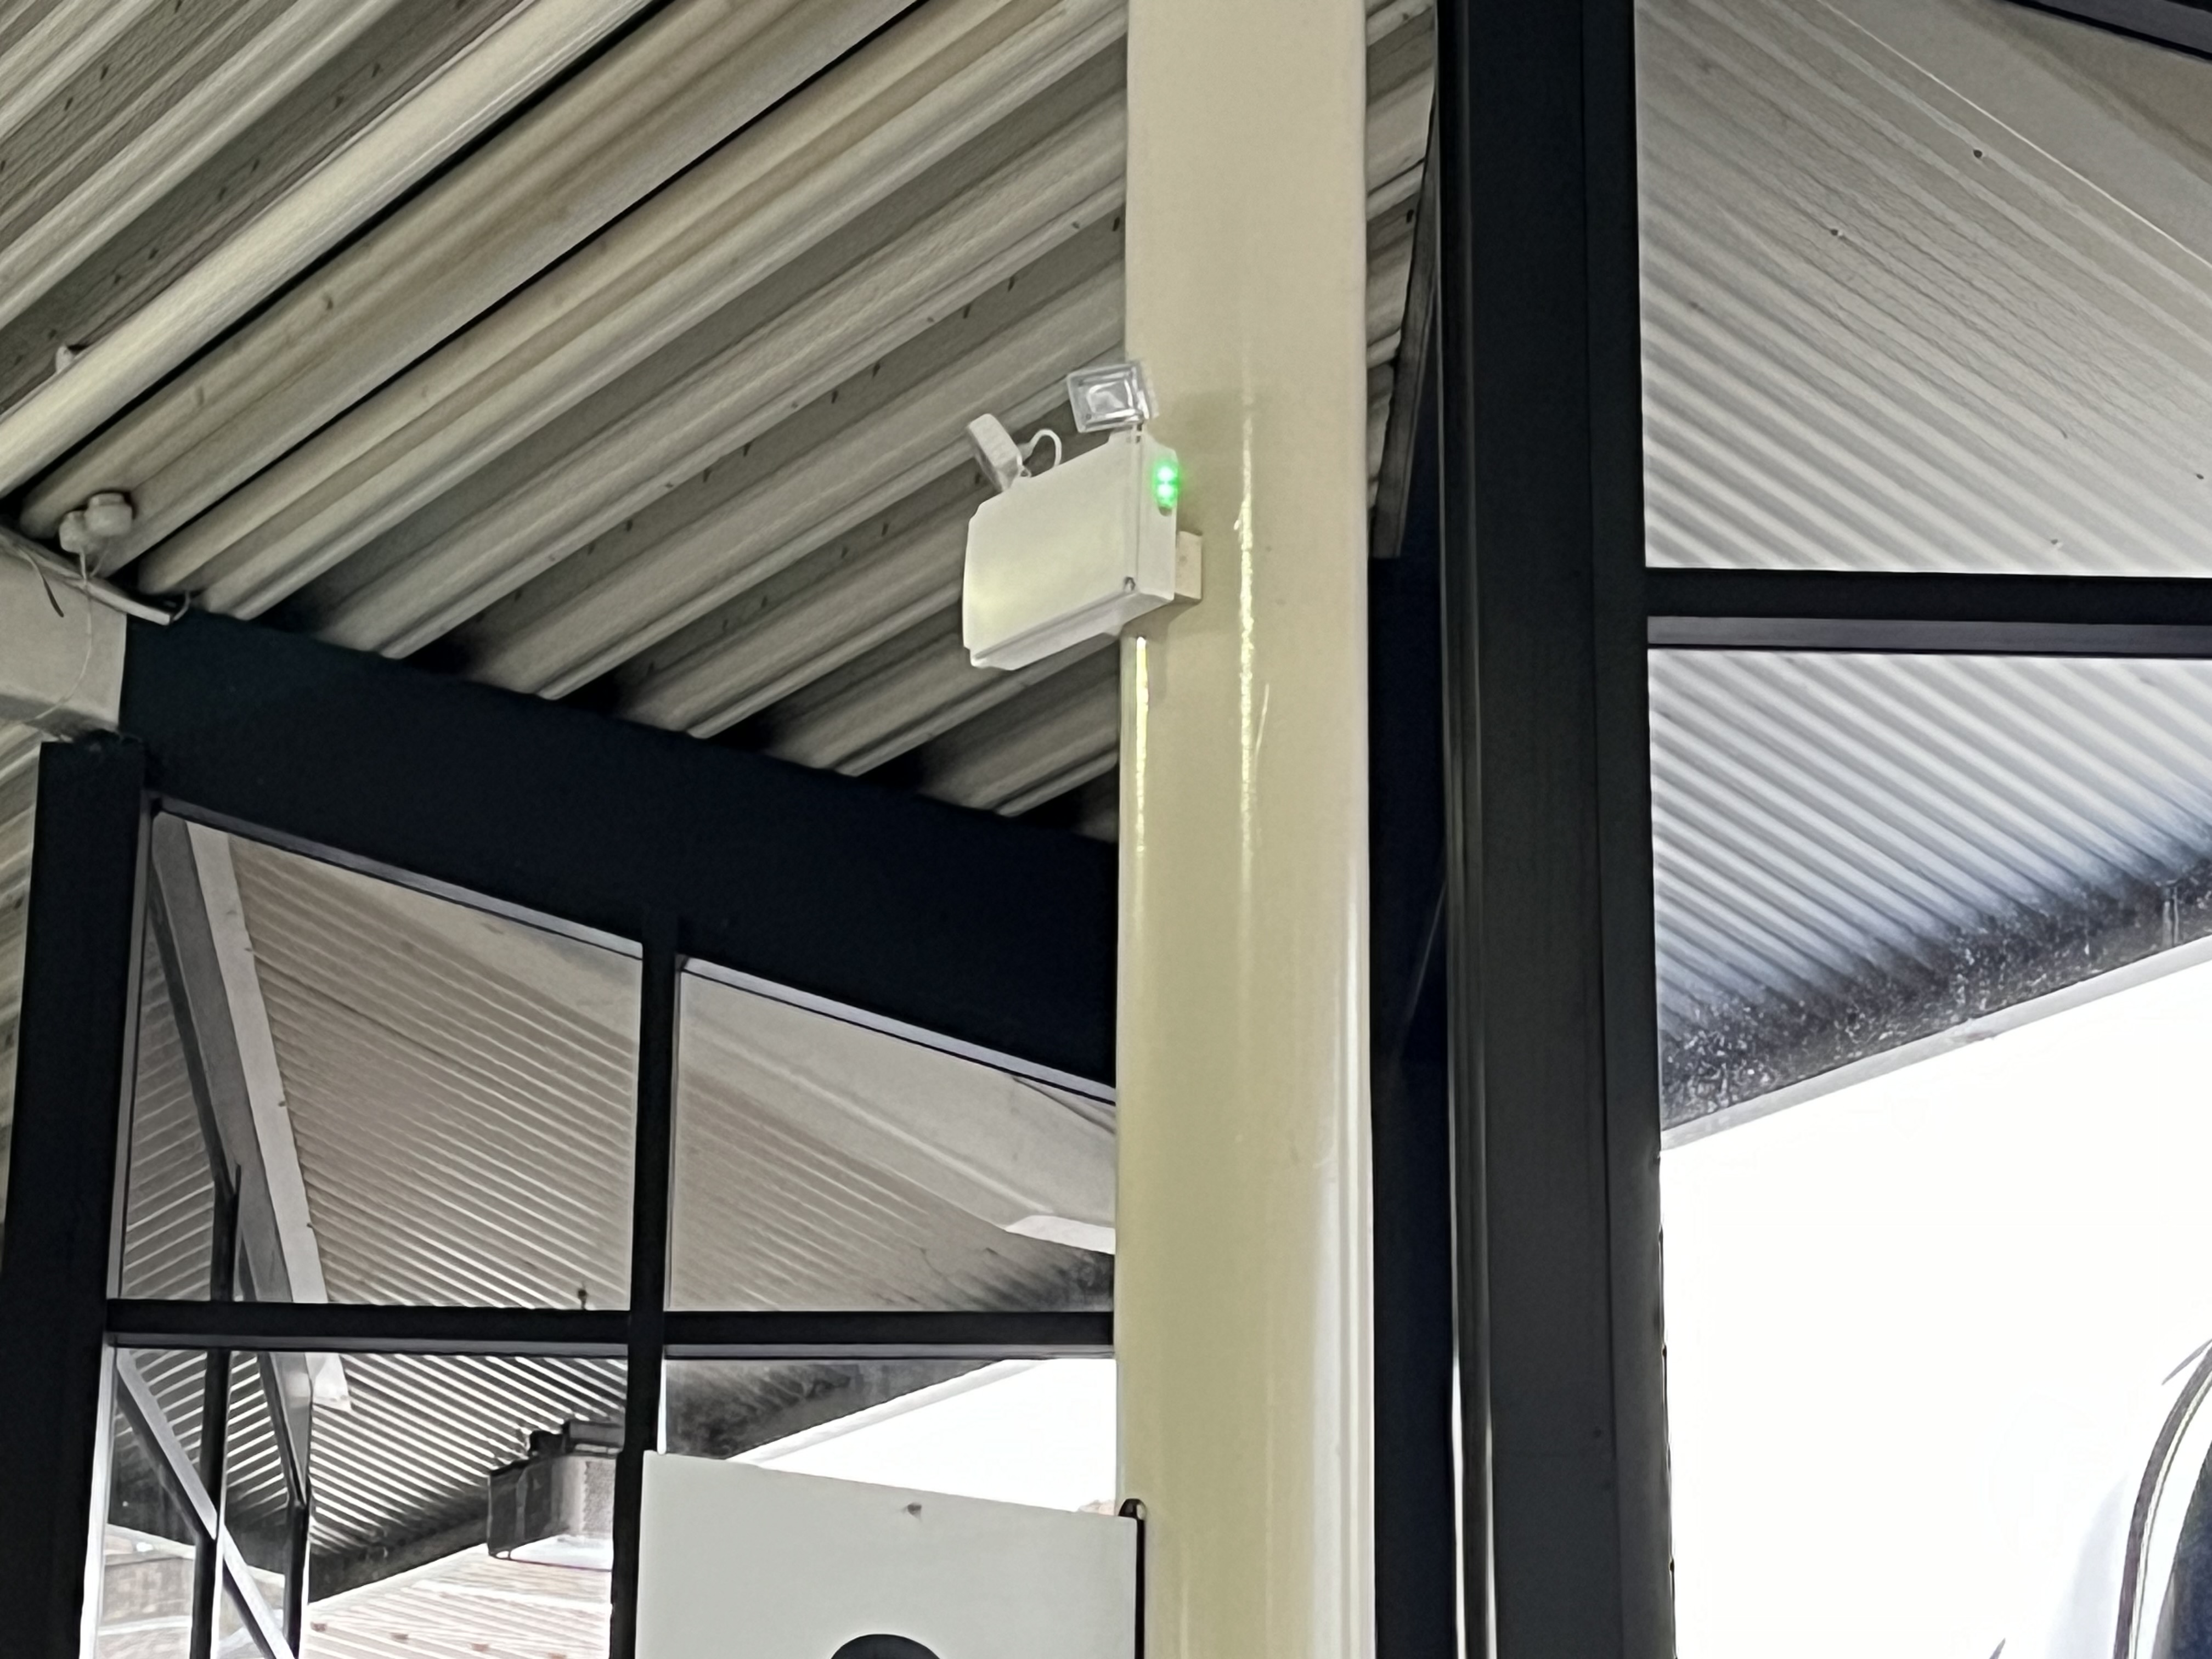 security camera attached to the top of a column in a building